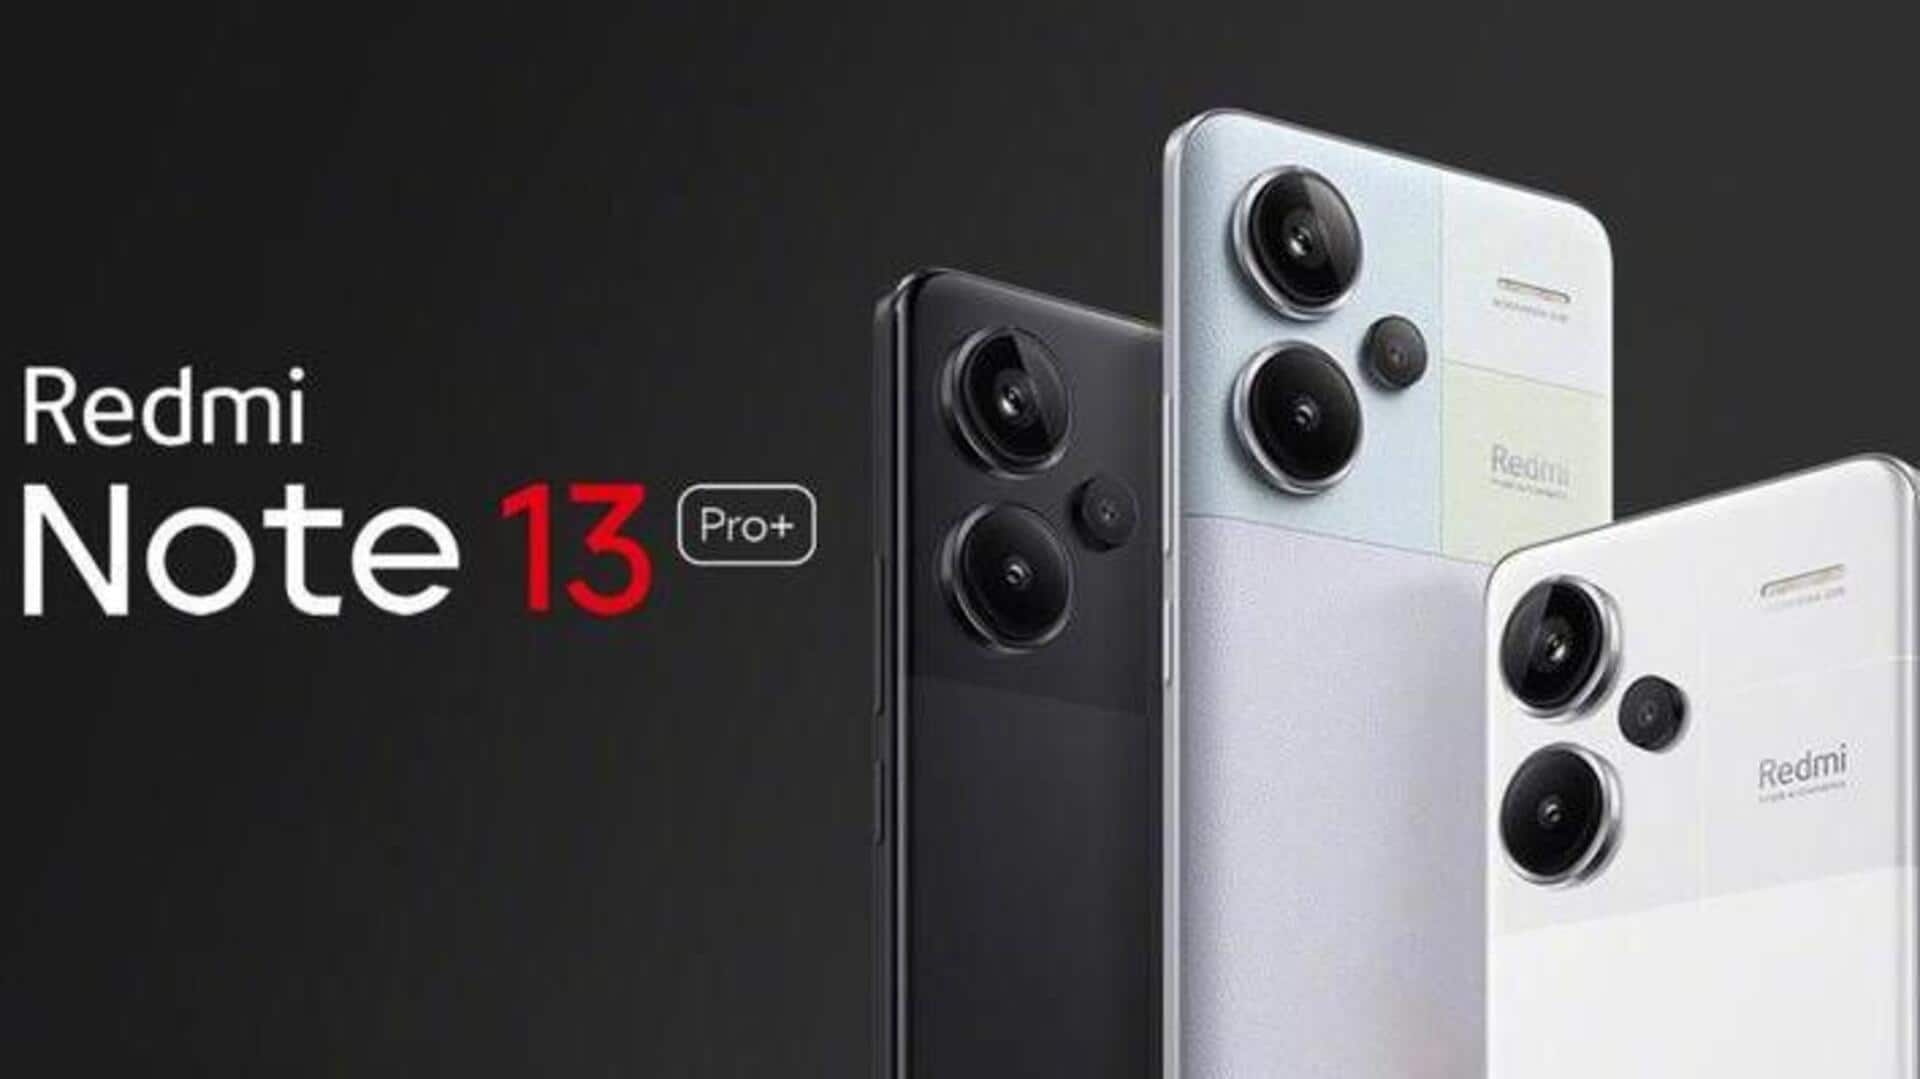 Redmi Note 13 Pro+'s specifications confirmed ahead of India launch